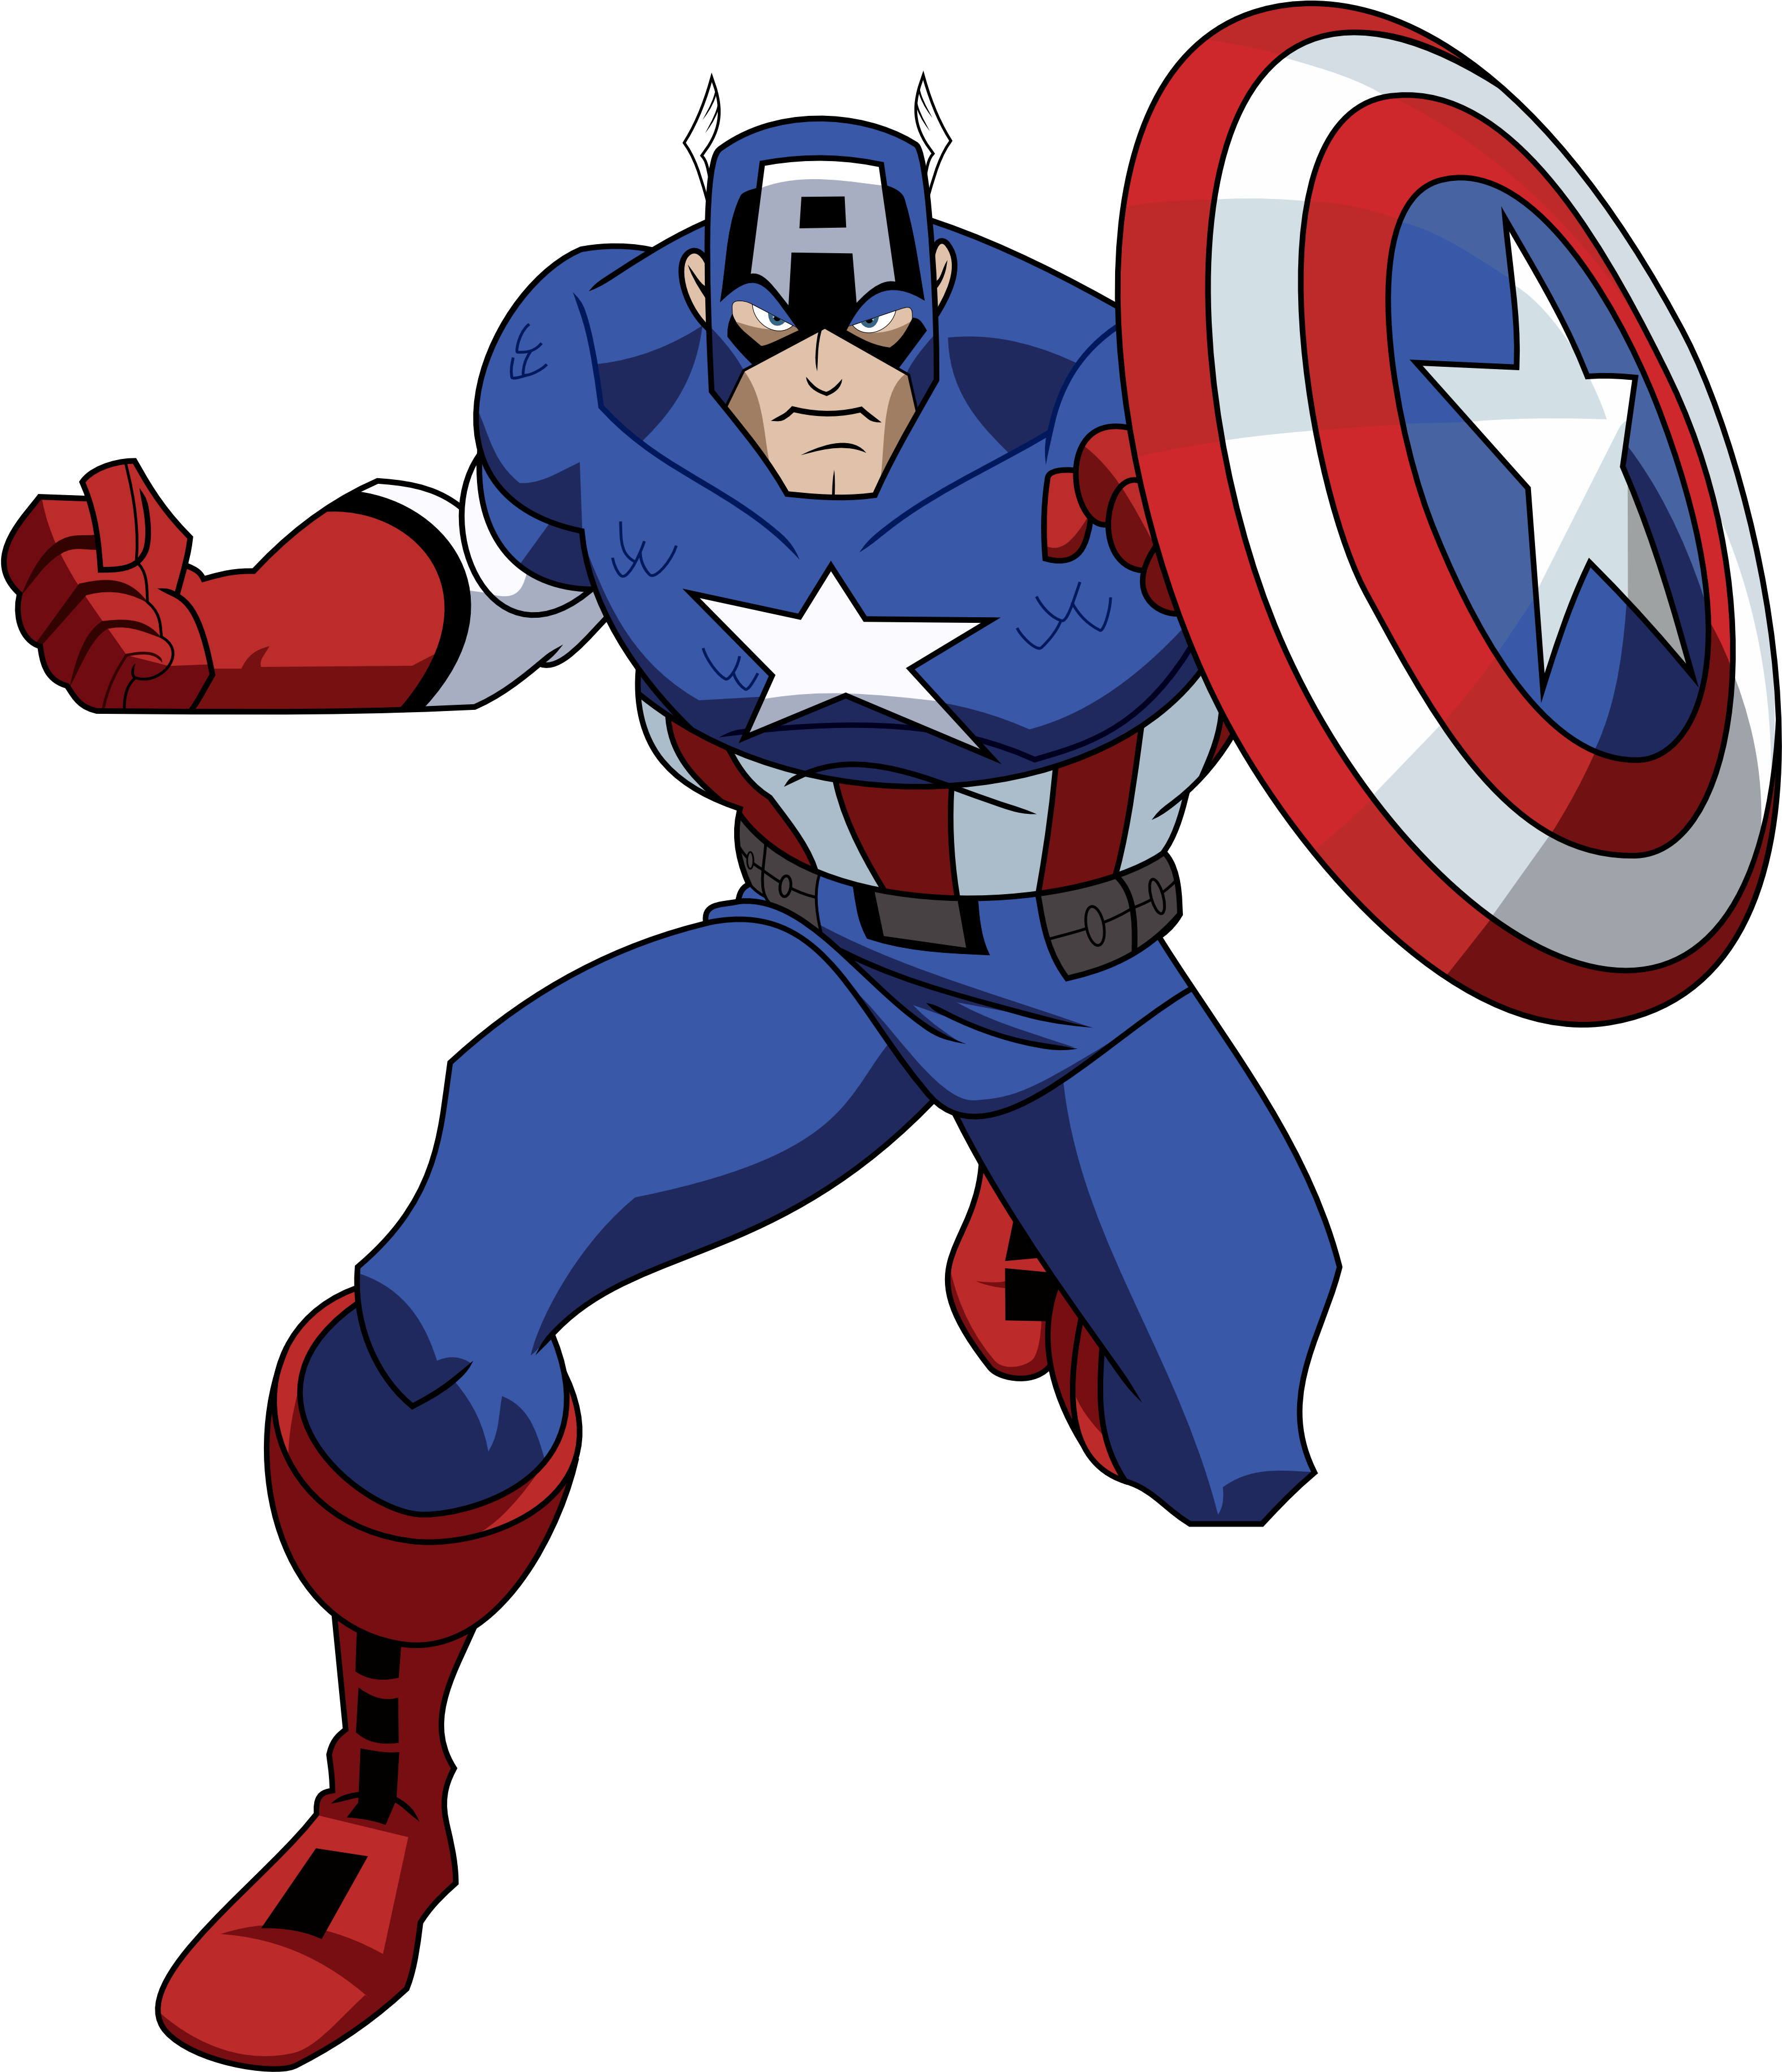 Captain America Clipart 9ipzkr9at - Avengers Earth's Mightiest Hero...